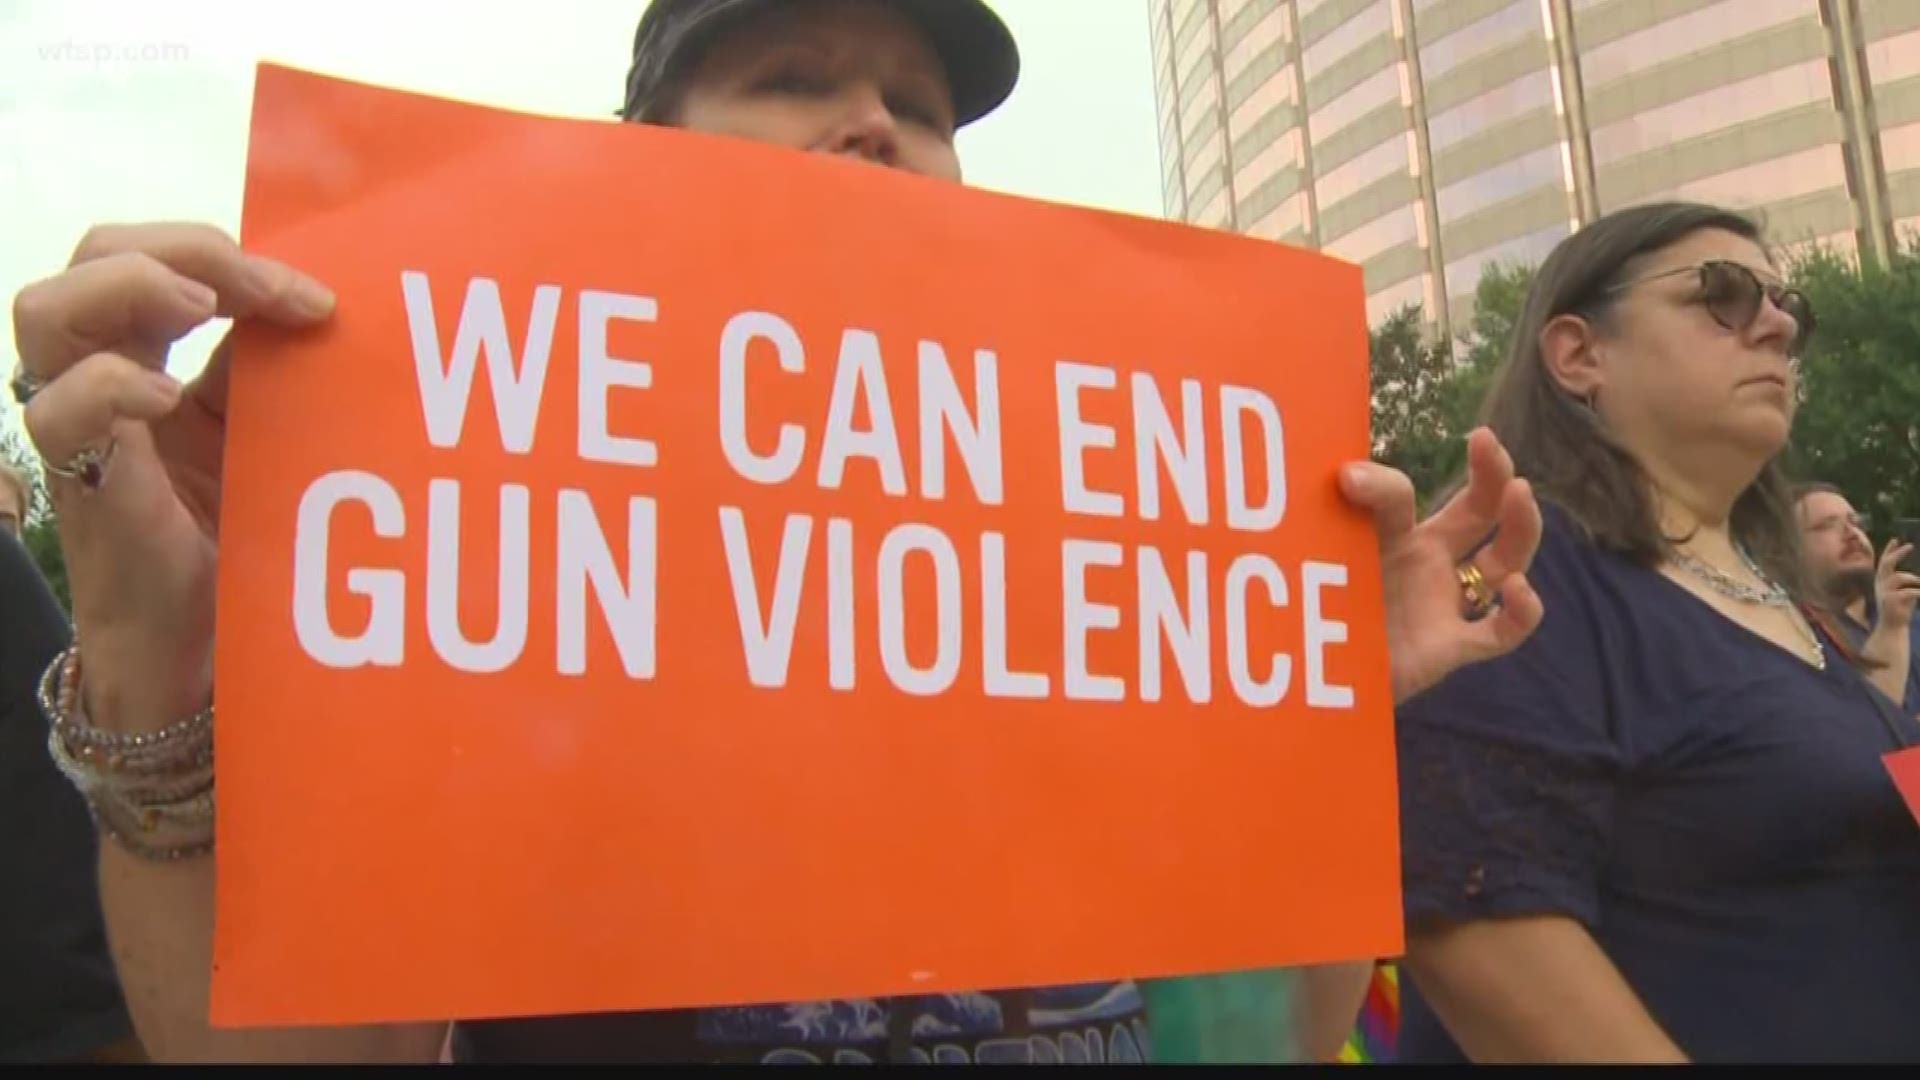 Advocates for gun reform are taking the fight to a place painfully familiar with the violence seen in El Paso and Dayton last weekend: Marjory Stoneman Douglas High school in South Florida.